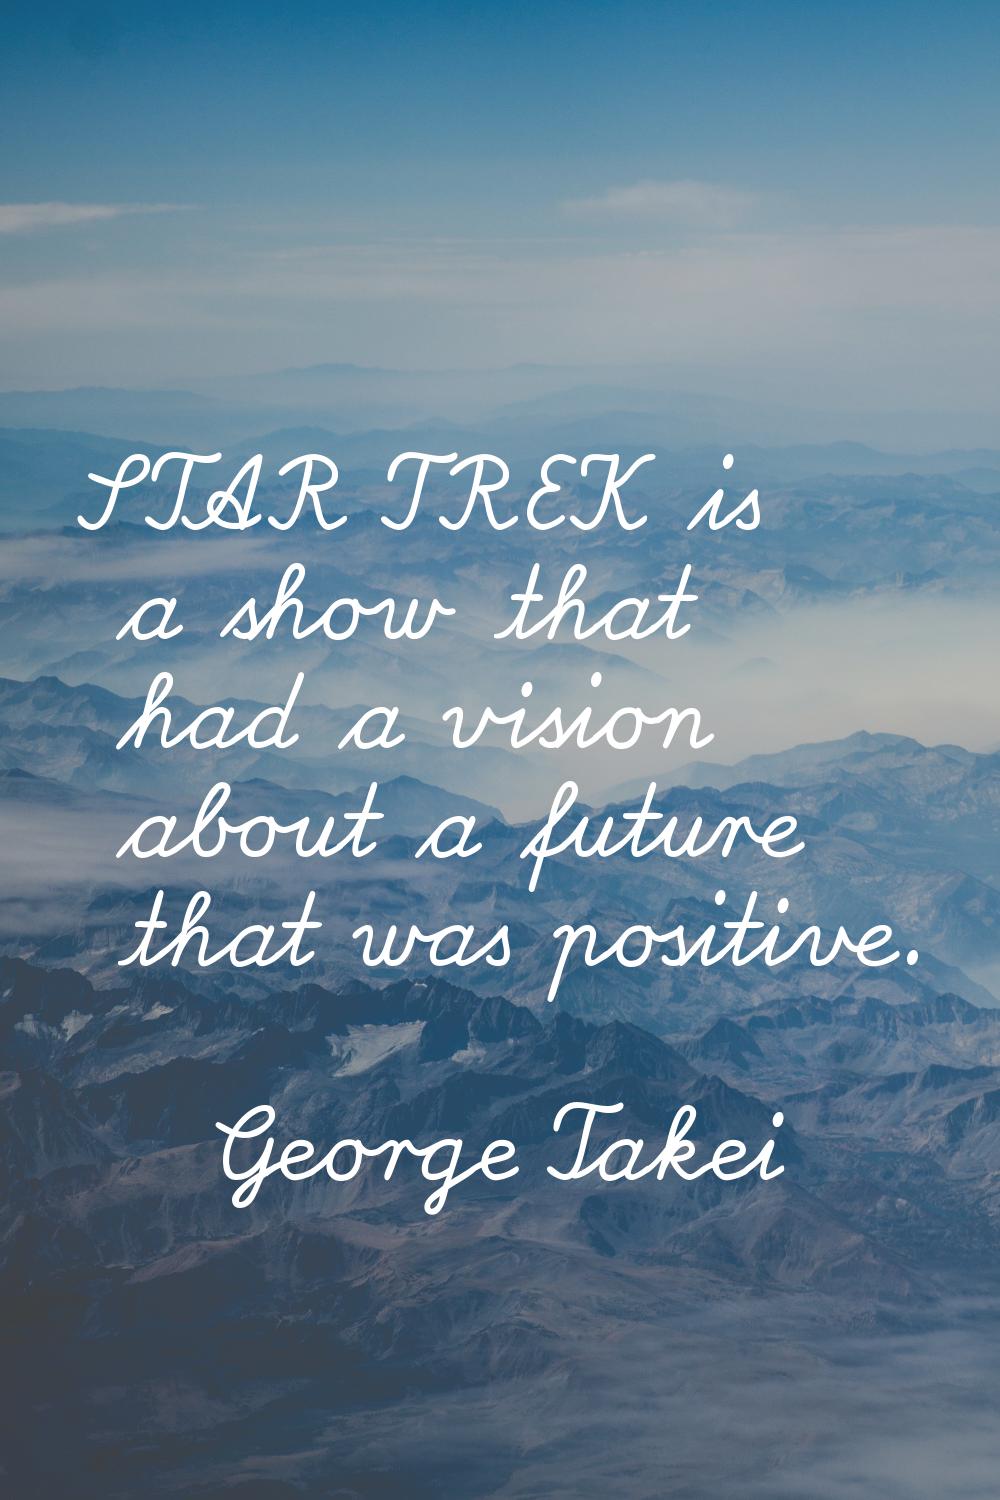 STAR TREK is a show that had a vision about a future that was positive.